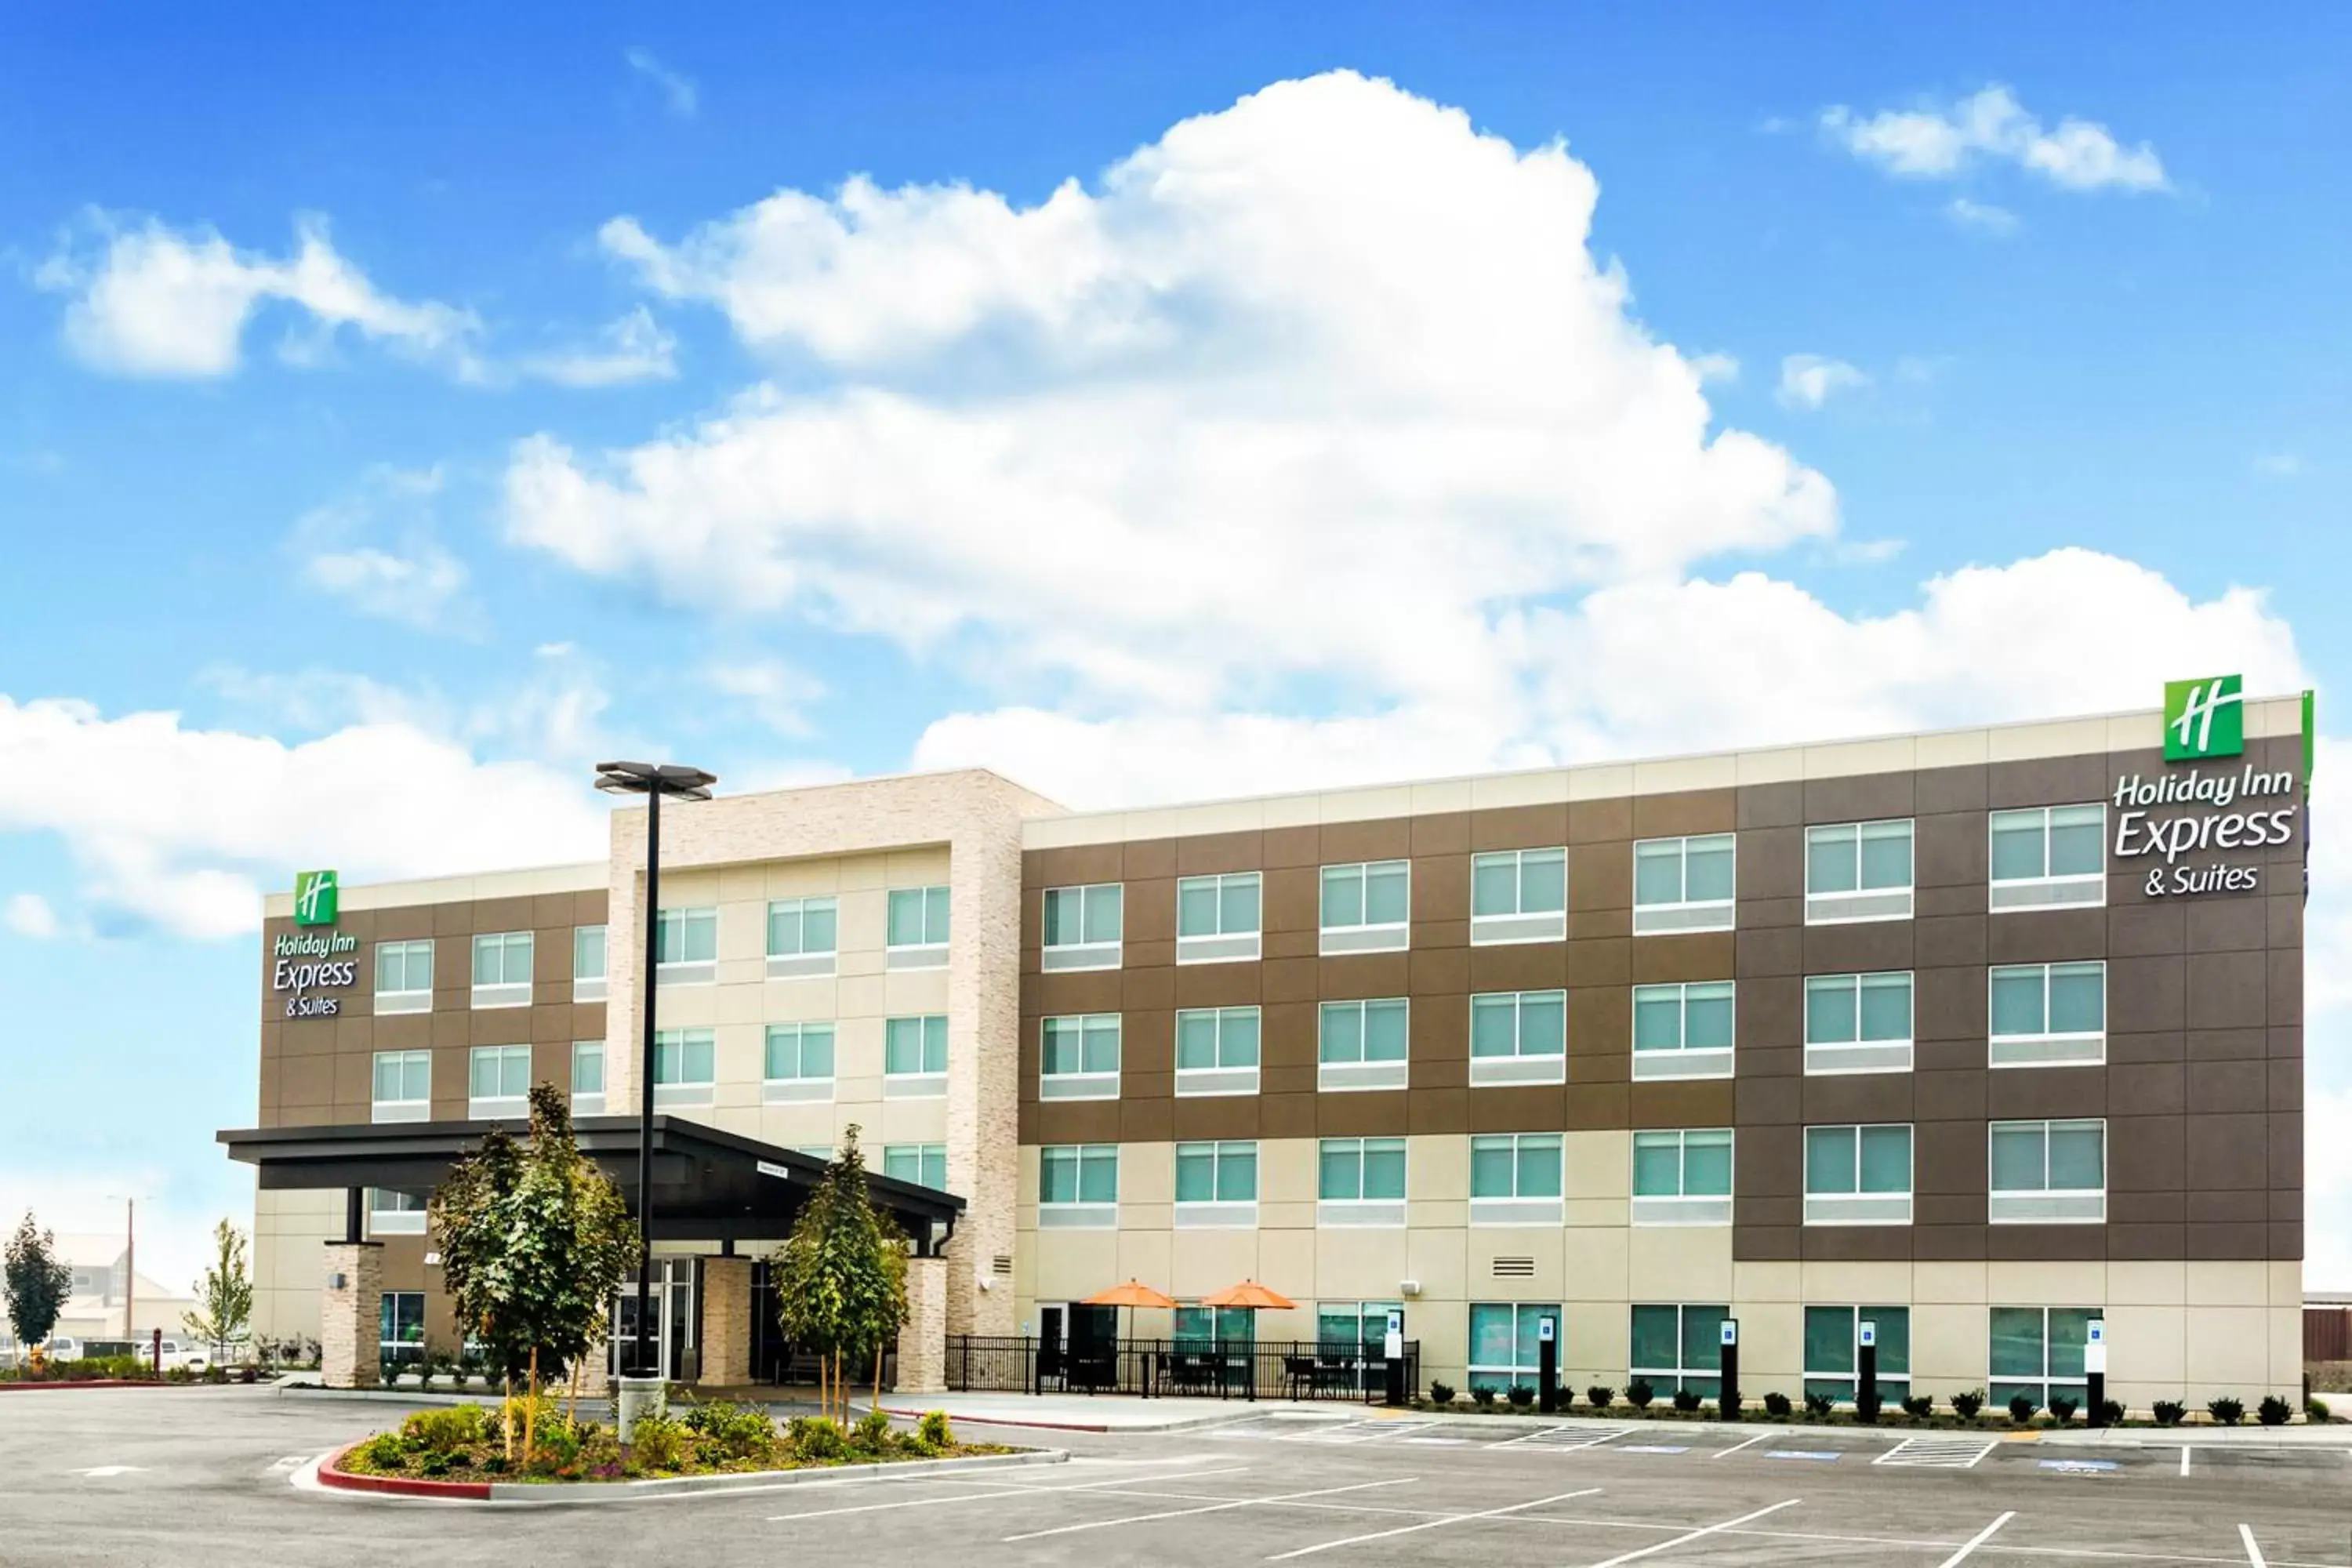 Property Building in Holiday Inn Express & Suites - Prosser - Yakima Valley Wine, an IHG Hotel